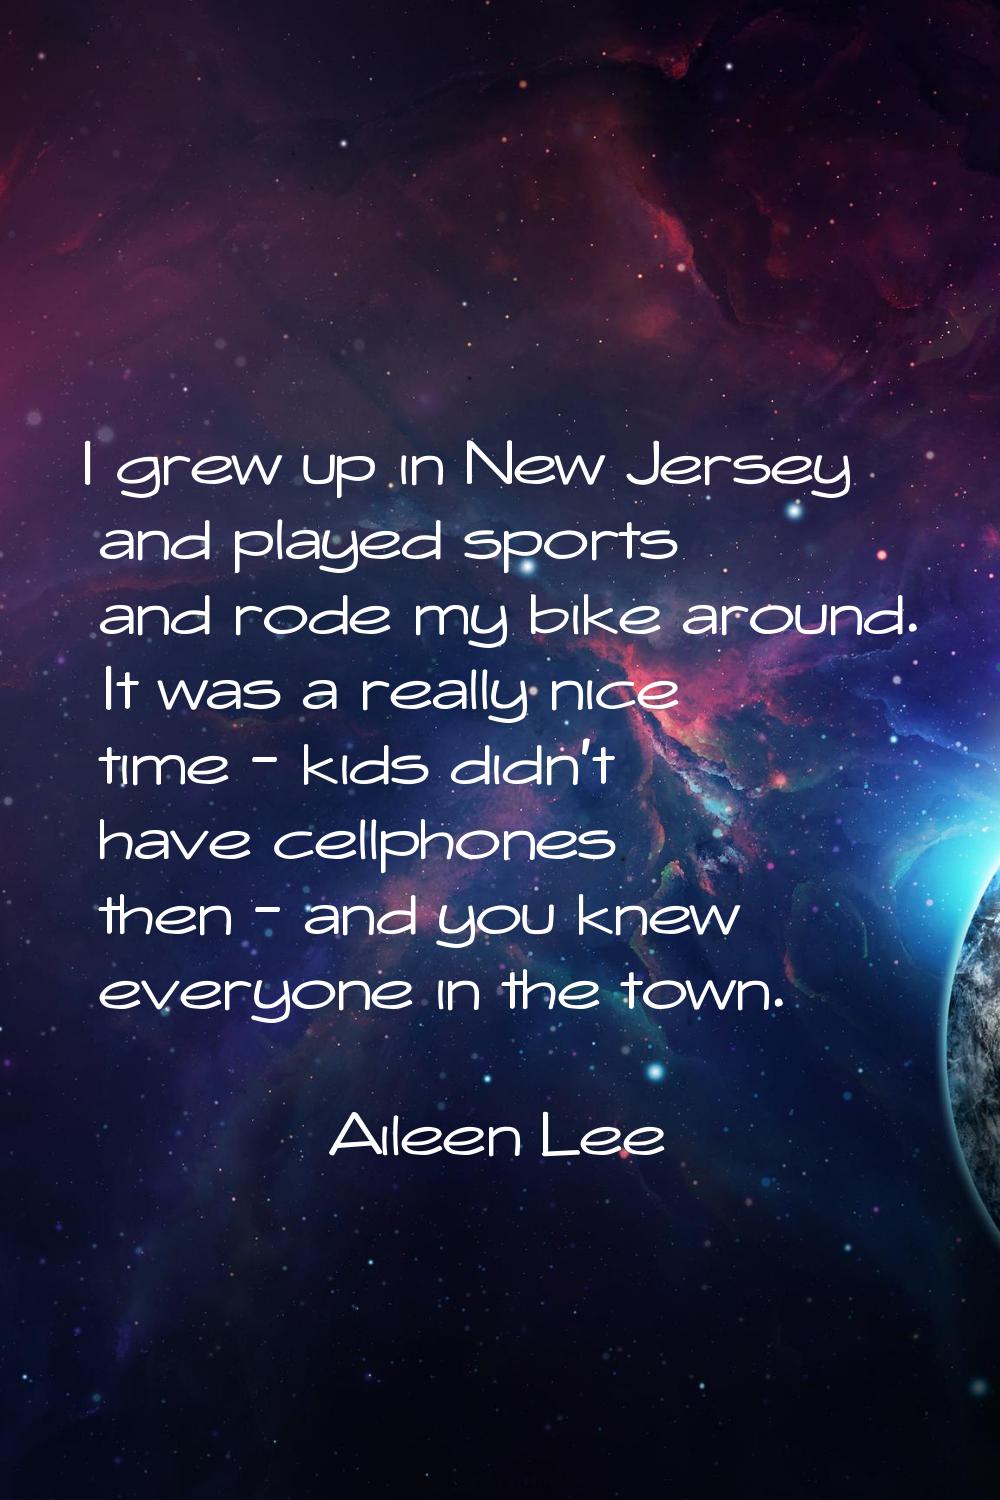 I grew up in New Jersey and played sports and rode my bike around. It was a really nice time - kids